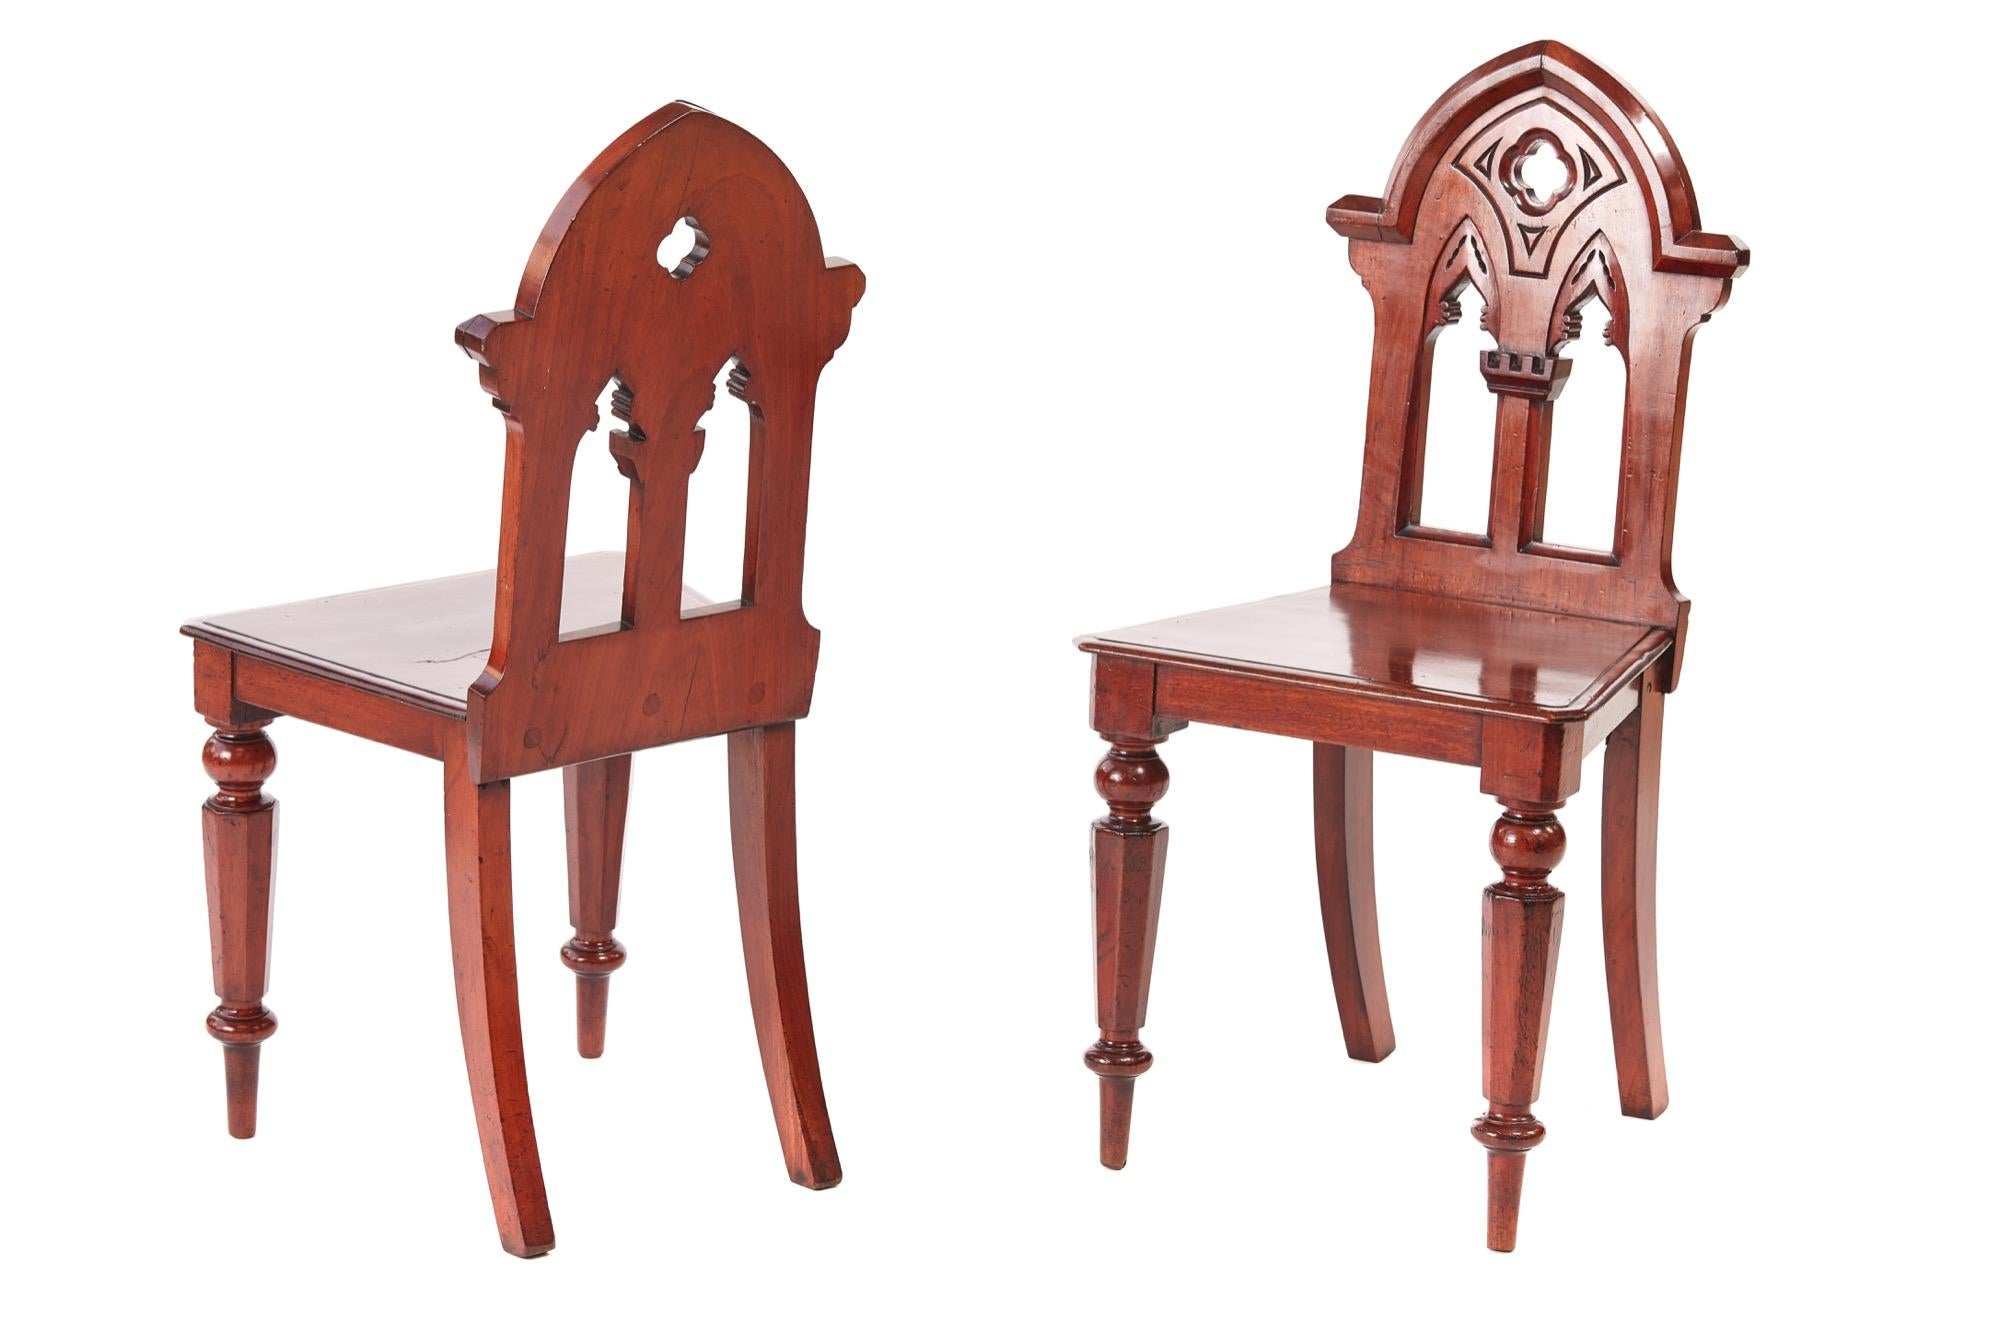 Pair of antique Victorian mahogany gothic hall chairs, with lovely shaped carved mahogany gothic backs, solid mahogany seats, standing on shaped turned legs to the front outswept back legs
Lovely color and condition
Measures: 17